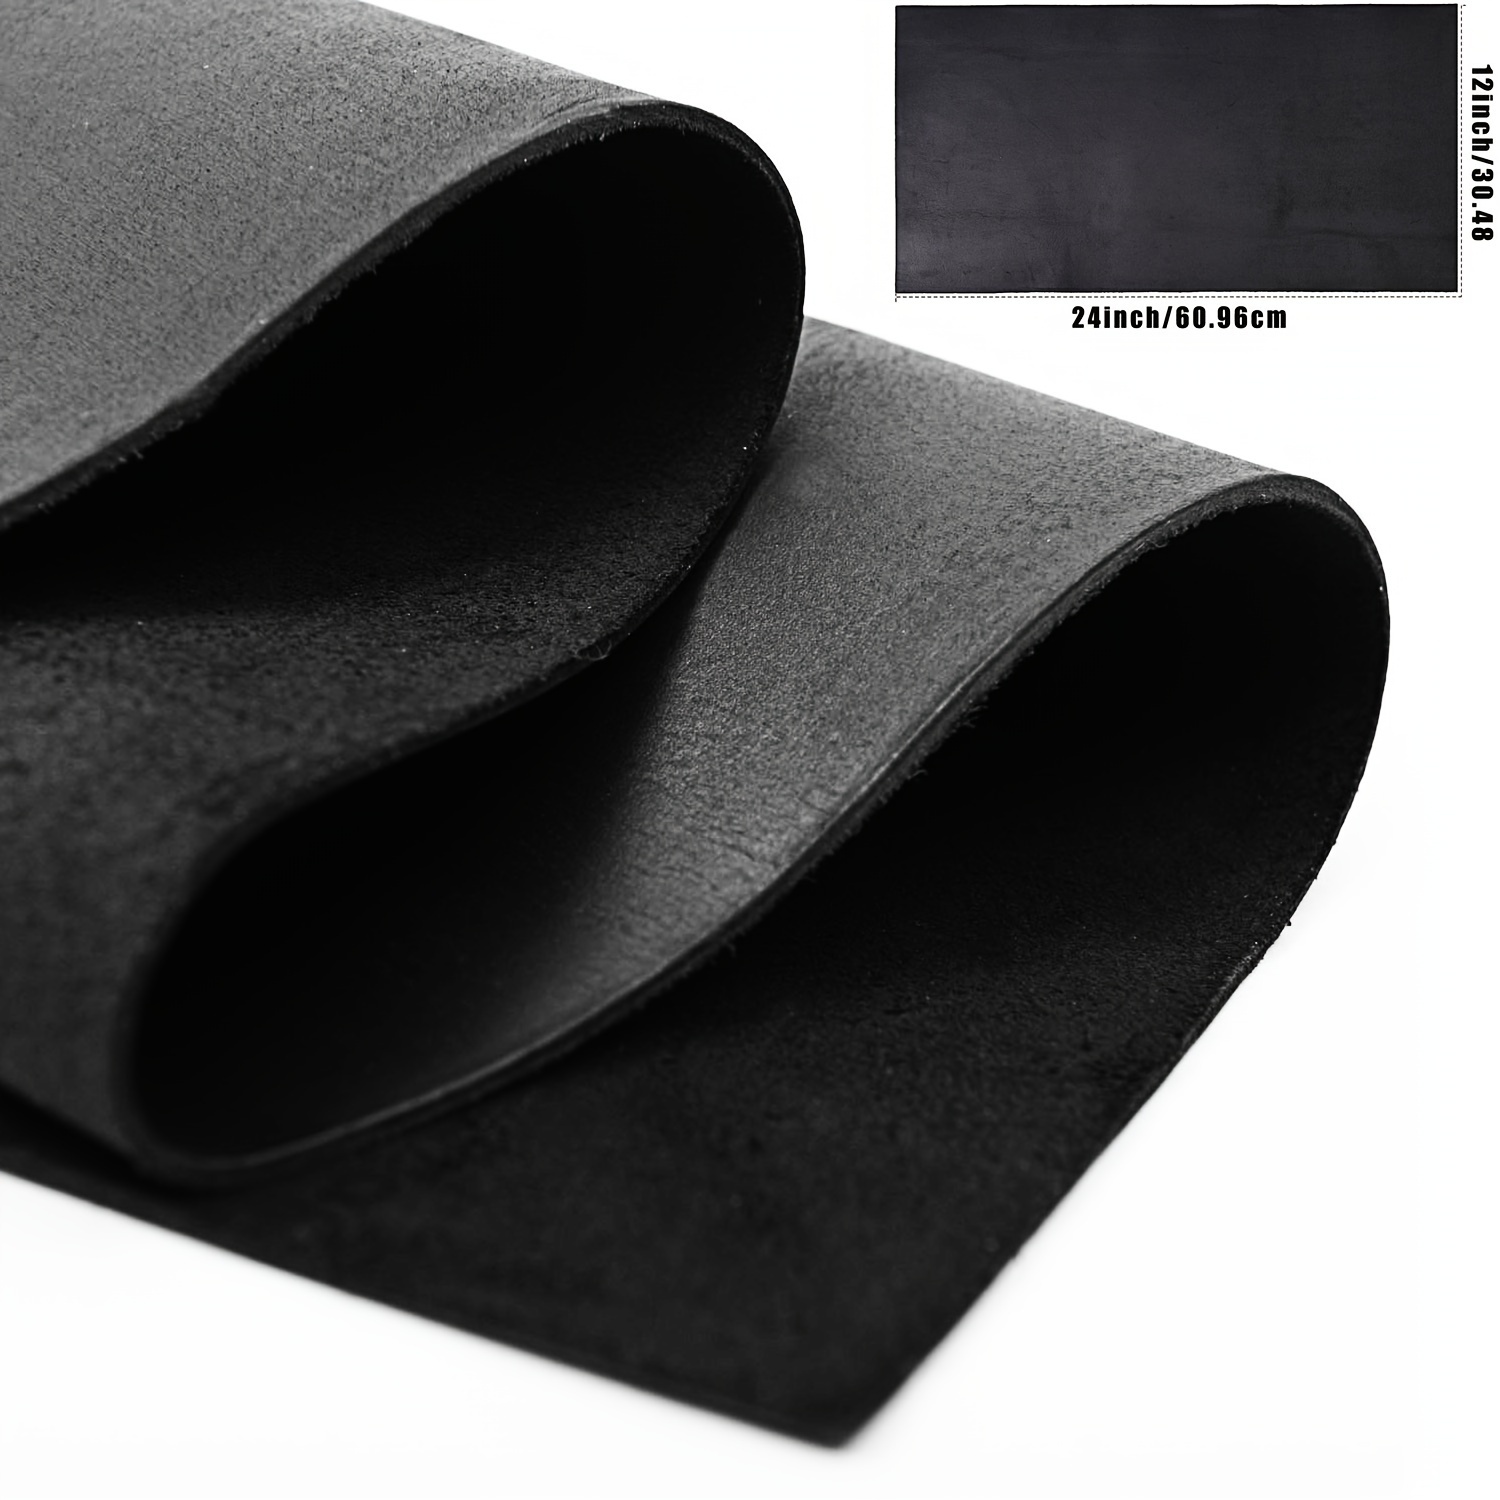 Leather Sheets for Crafts Black - 1.8-2.0mm Thick Full Grain Leather DIY  Pre-Cut Leather Square for Leather Earrings, Leather Wallet & Crafts  (12''x12'', Black) price in UAE,  UAE